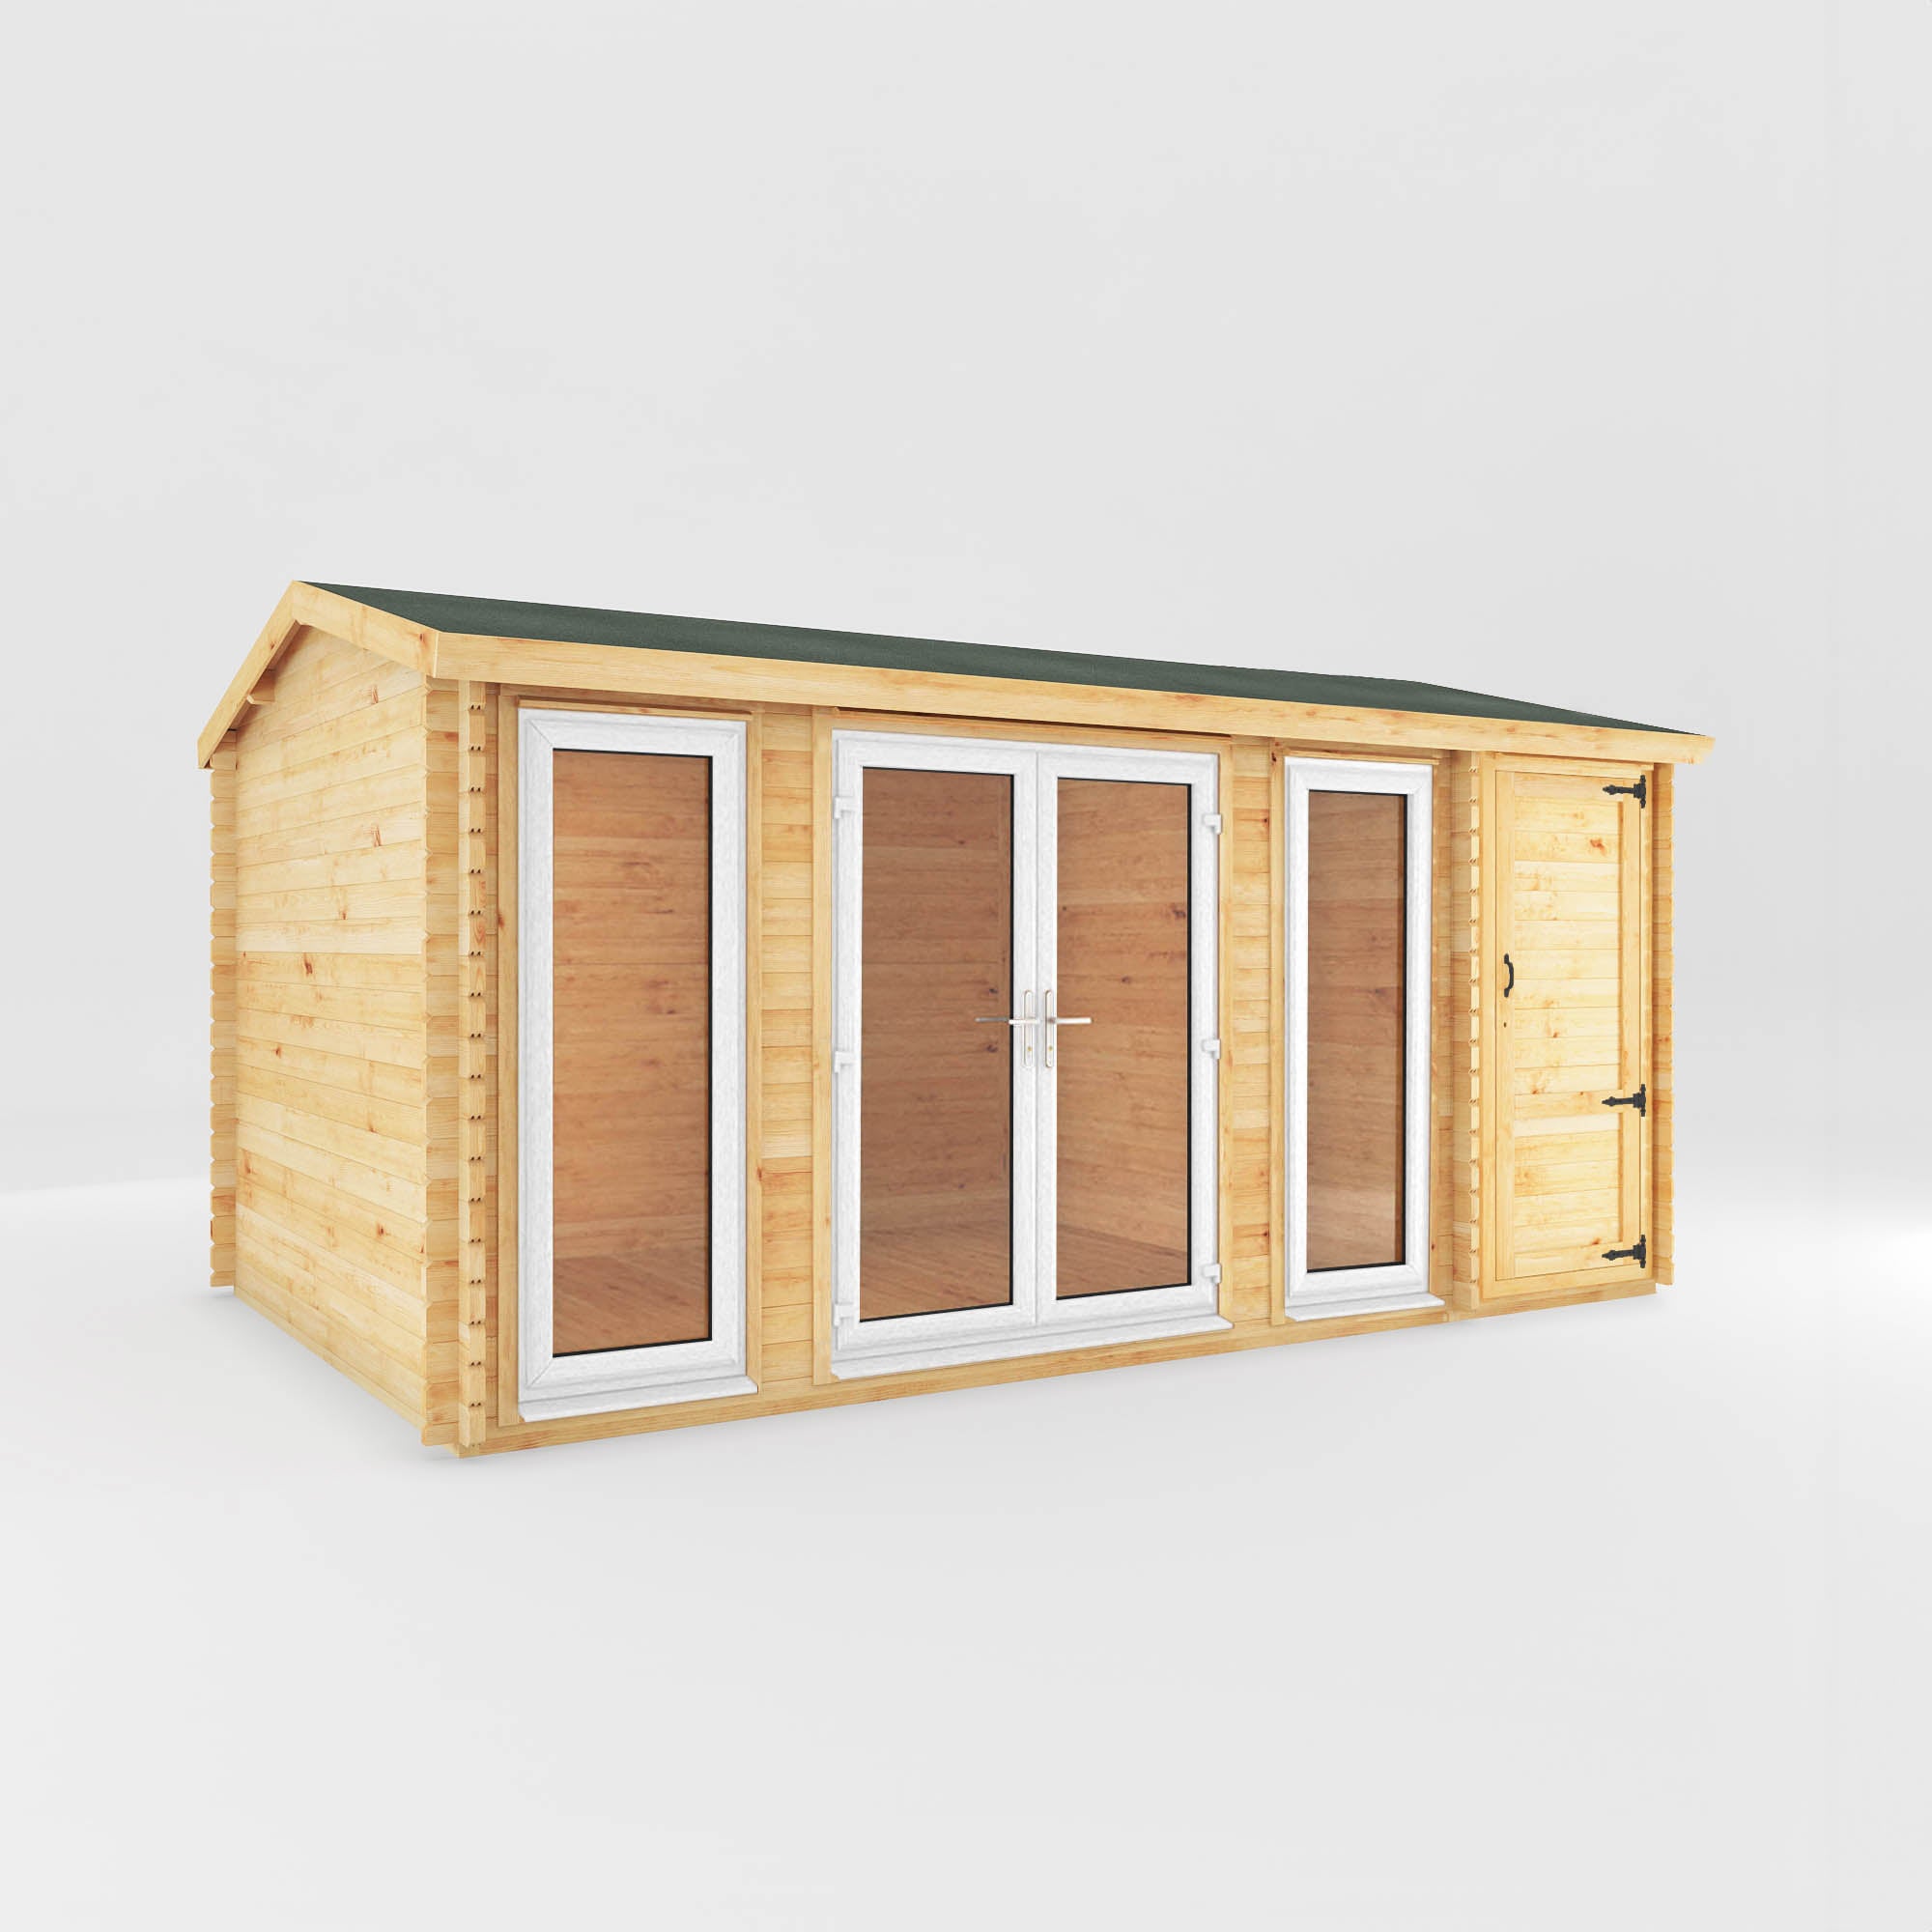 5.1m x 3m Home Office Studio Log Cabin with Side Shed - UPVC White